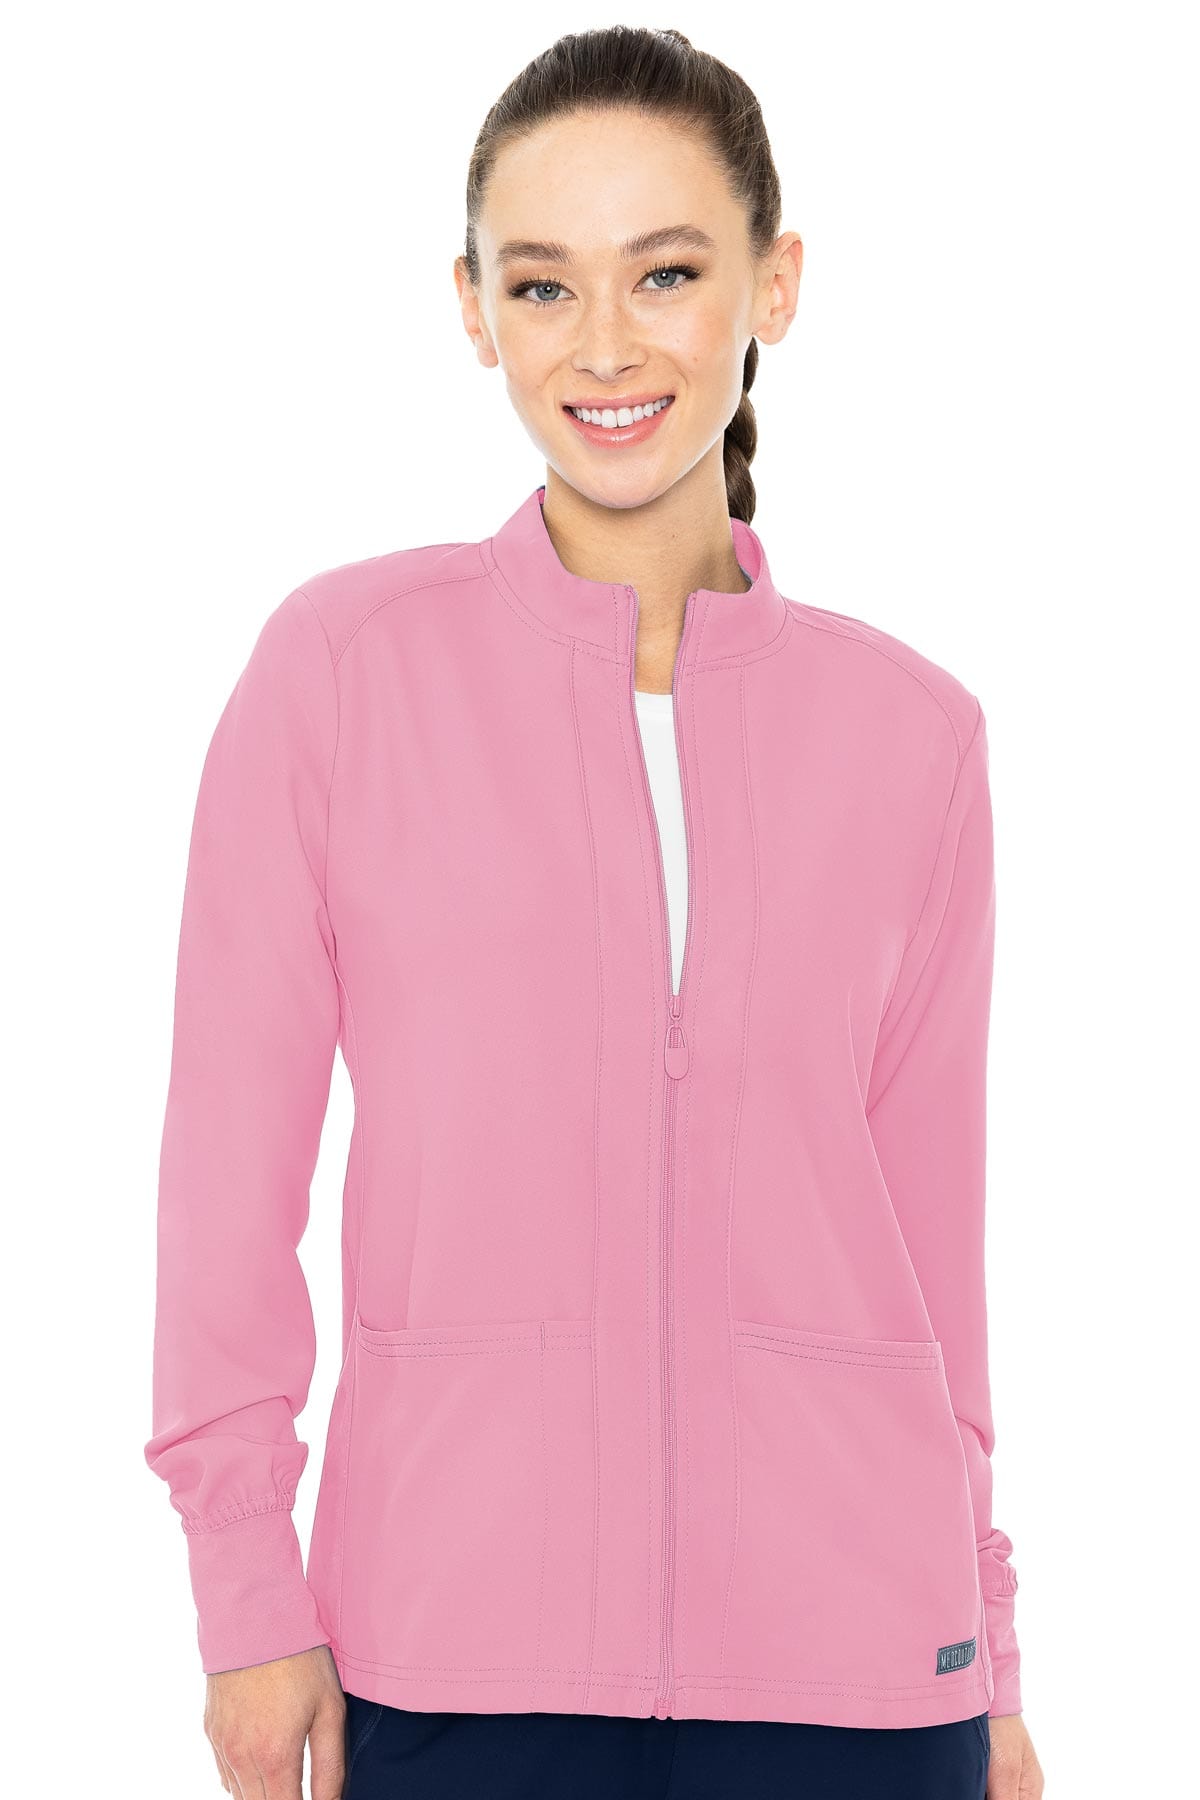 Insight MedCouture warm up jacket in pink from Coulee Scrubs. 